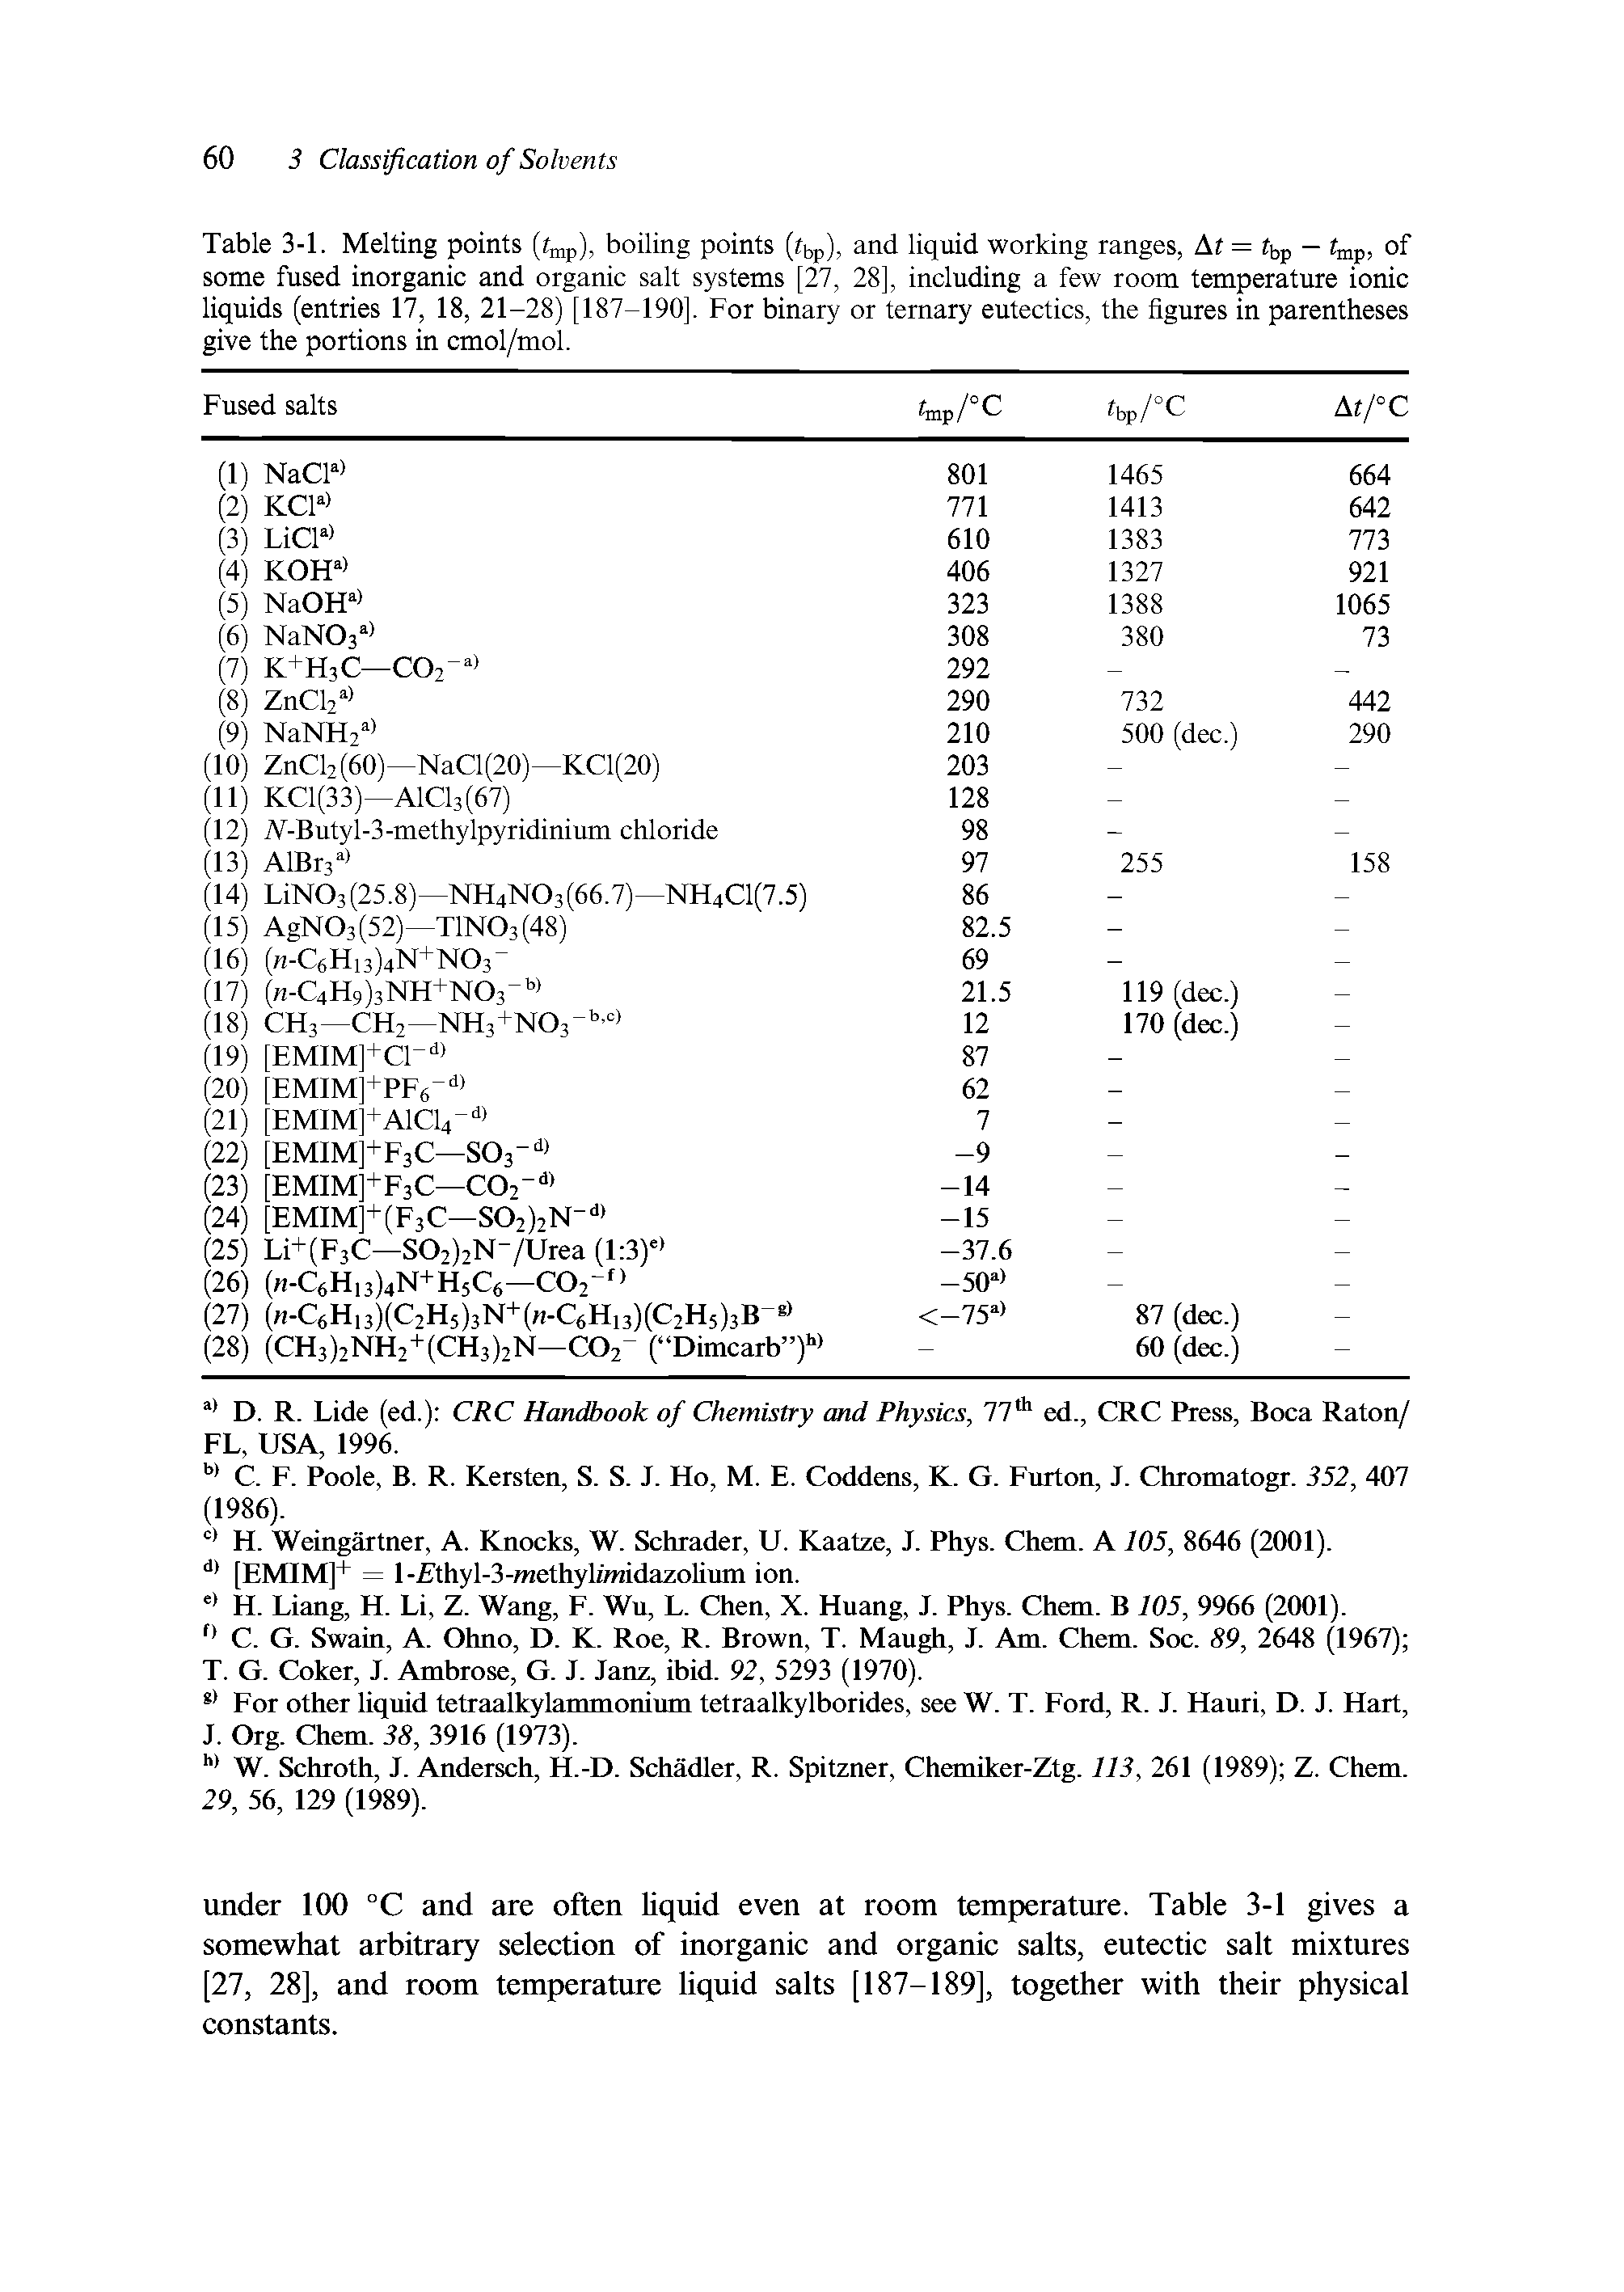 Table 3-1. Melting points (fmp), boiling points (fbp), and liquid working ranges, At = tbp — fmp, of some fused inorganic and organic salt systems [27, 28], including a few room temperature ionic liquids (entries 17, 18, 21-28) [187-190], For binary or ternary eutectics, the figures in parentheses give the portions in cmol/mol.